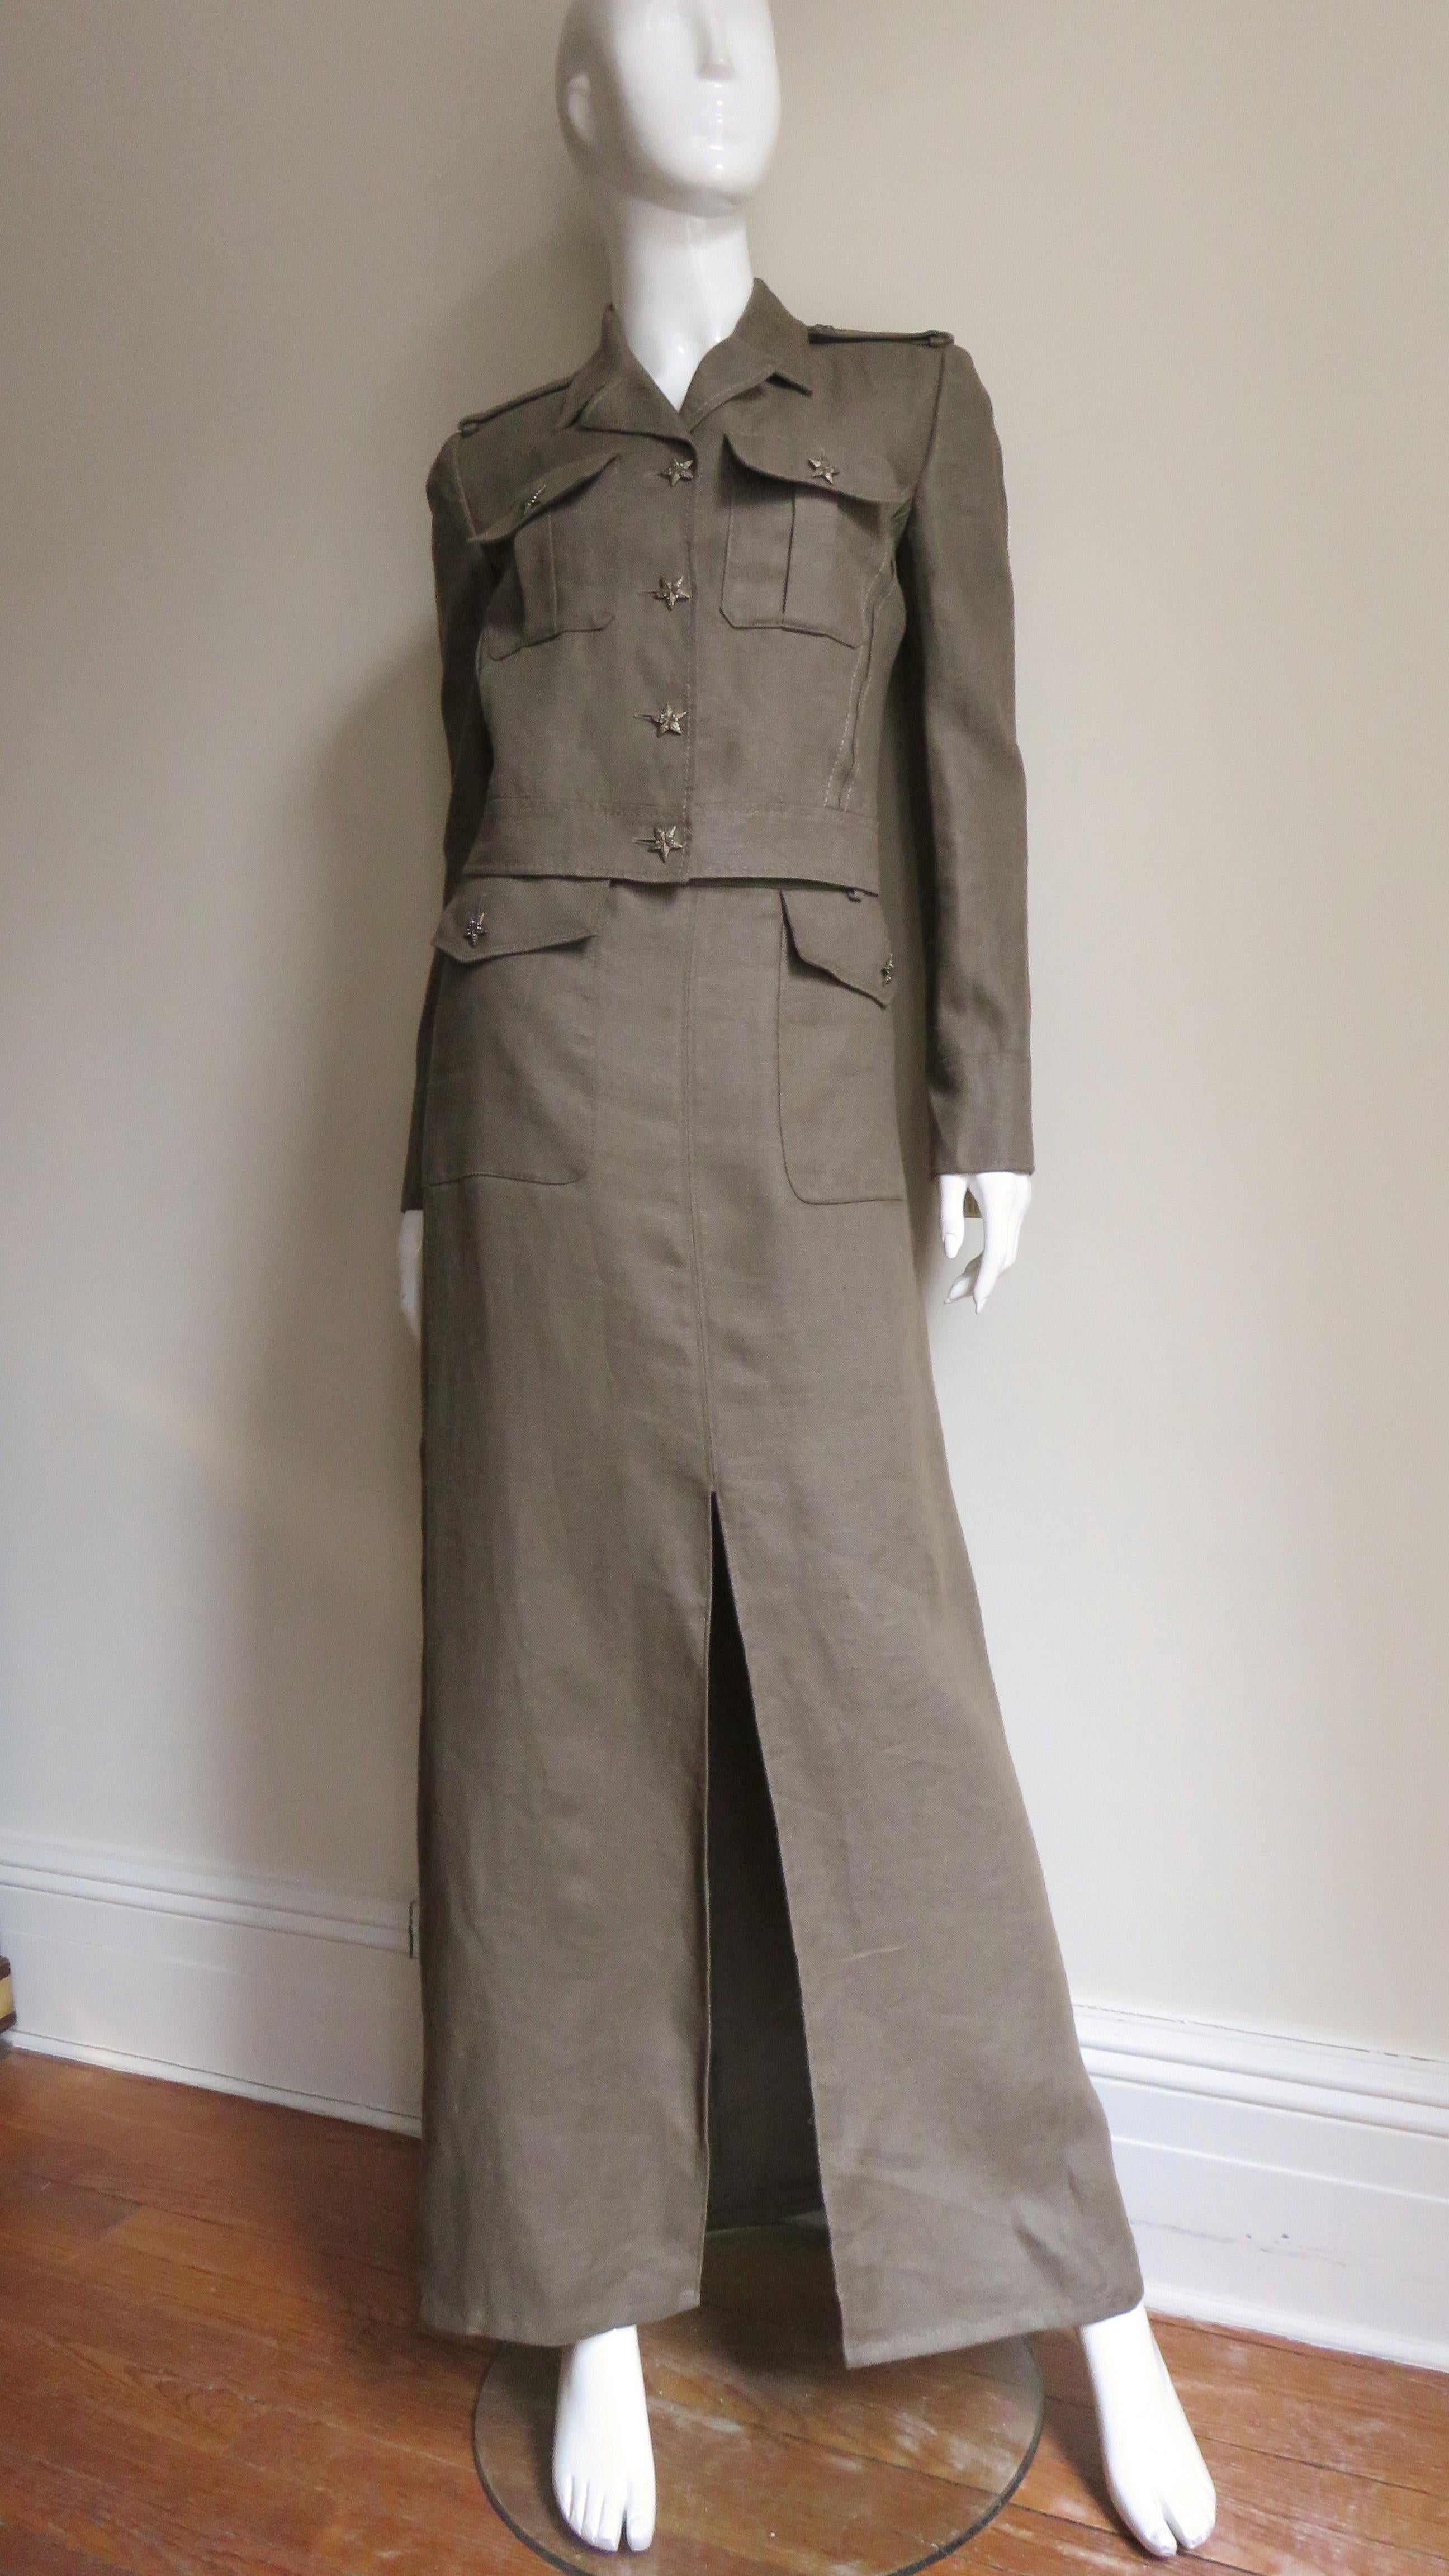 A great olive linen set from Valentino.  It consists of a hip length jean style jacket with front chest patch pockets with flaps and small notched lapel collar.  There are epaulets on the shoulders, long cuffed sleeves and vertical slot seaming and